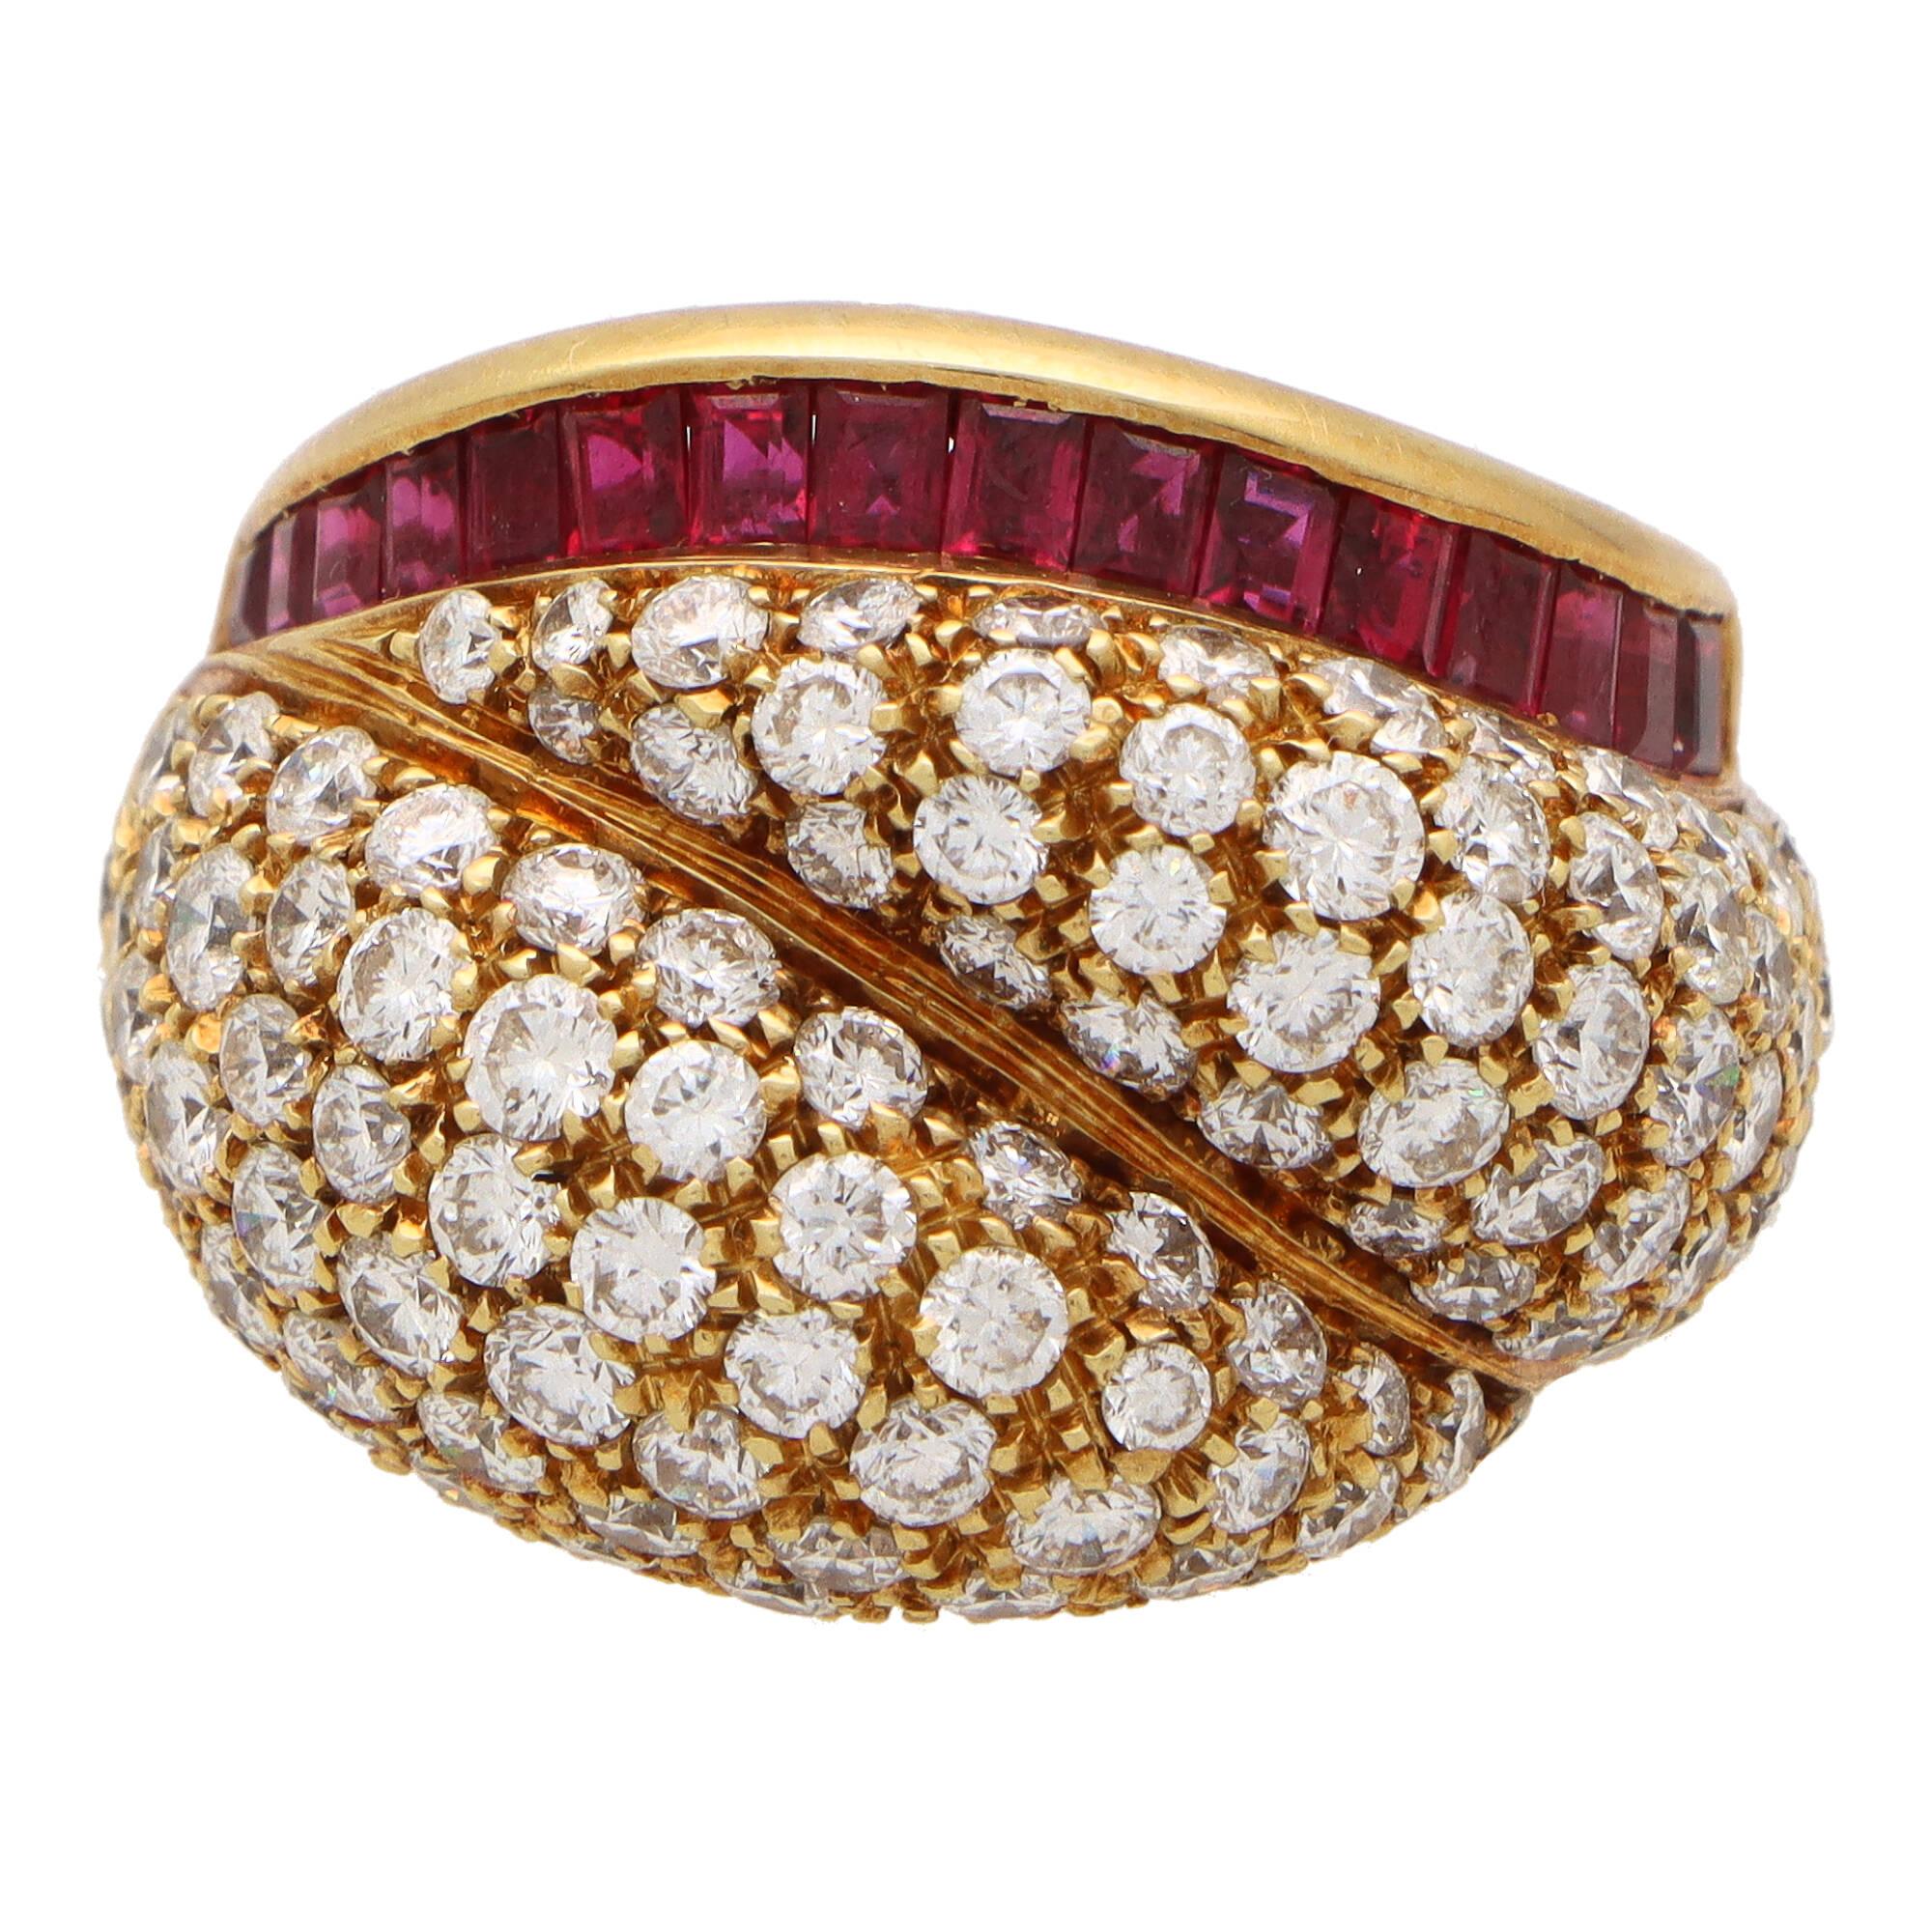 Vintage 1980's Tiffany & Co. Diamond and Ruby Bombé Ring in 18k Yellow Gold For Sale 2